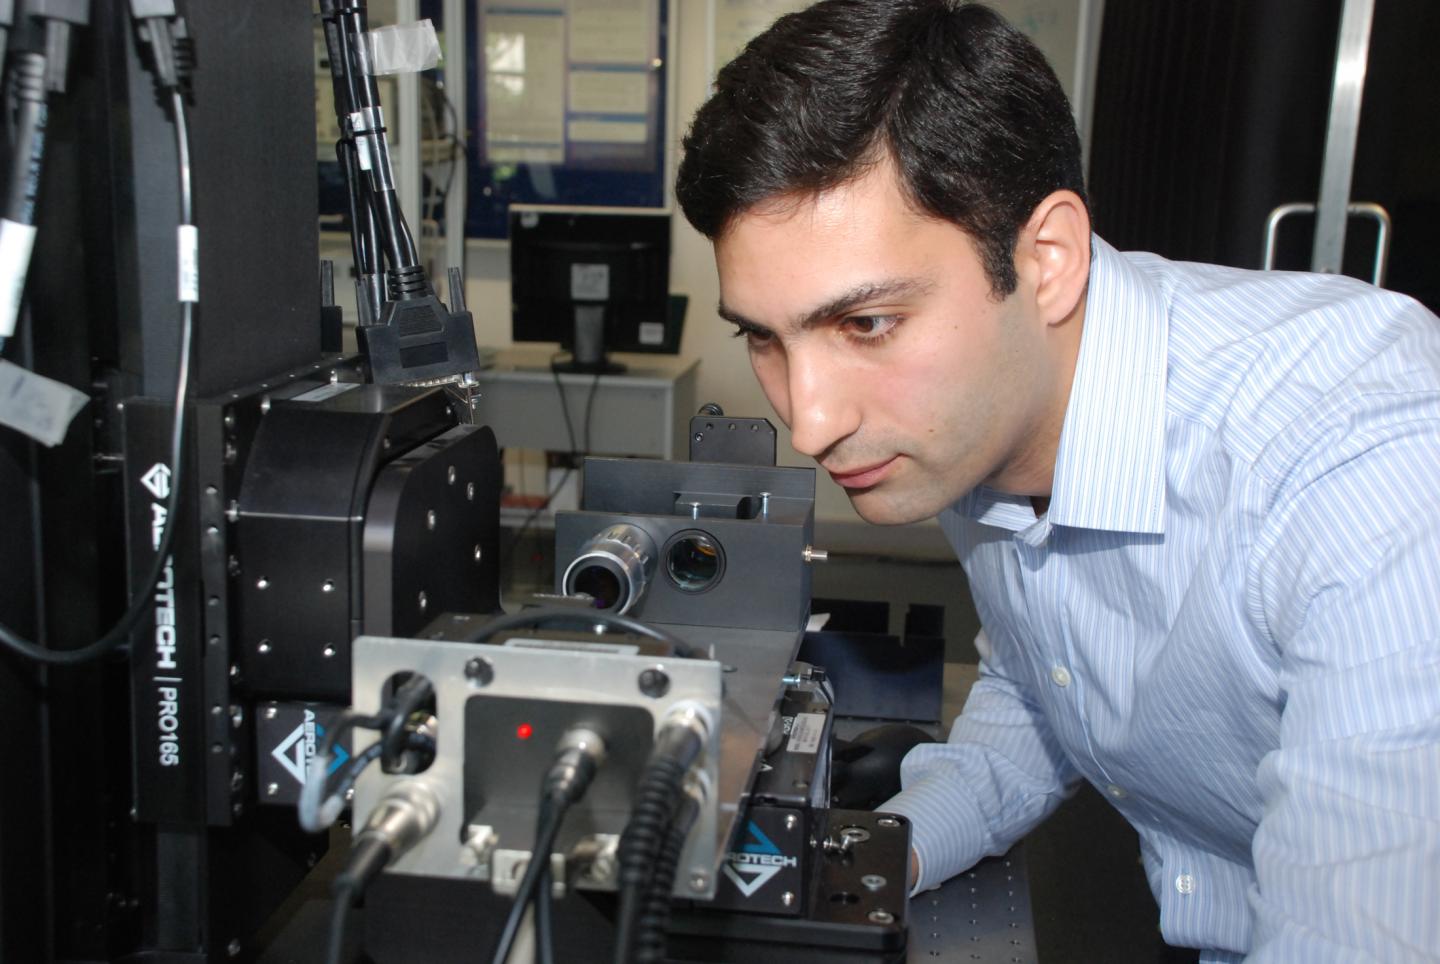 Breakthrough Optical Interferometry System Clears Way for Spin-Out Company